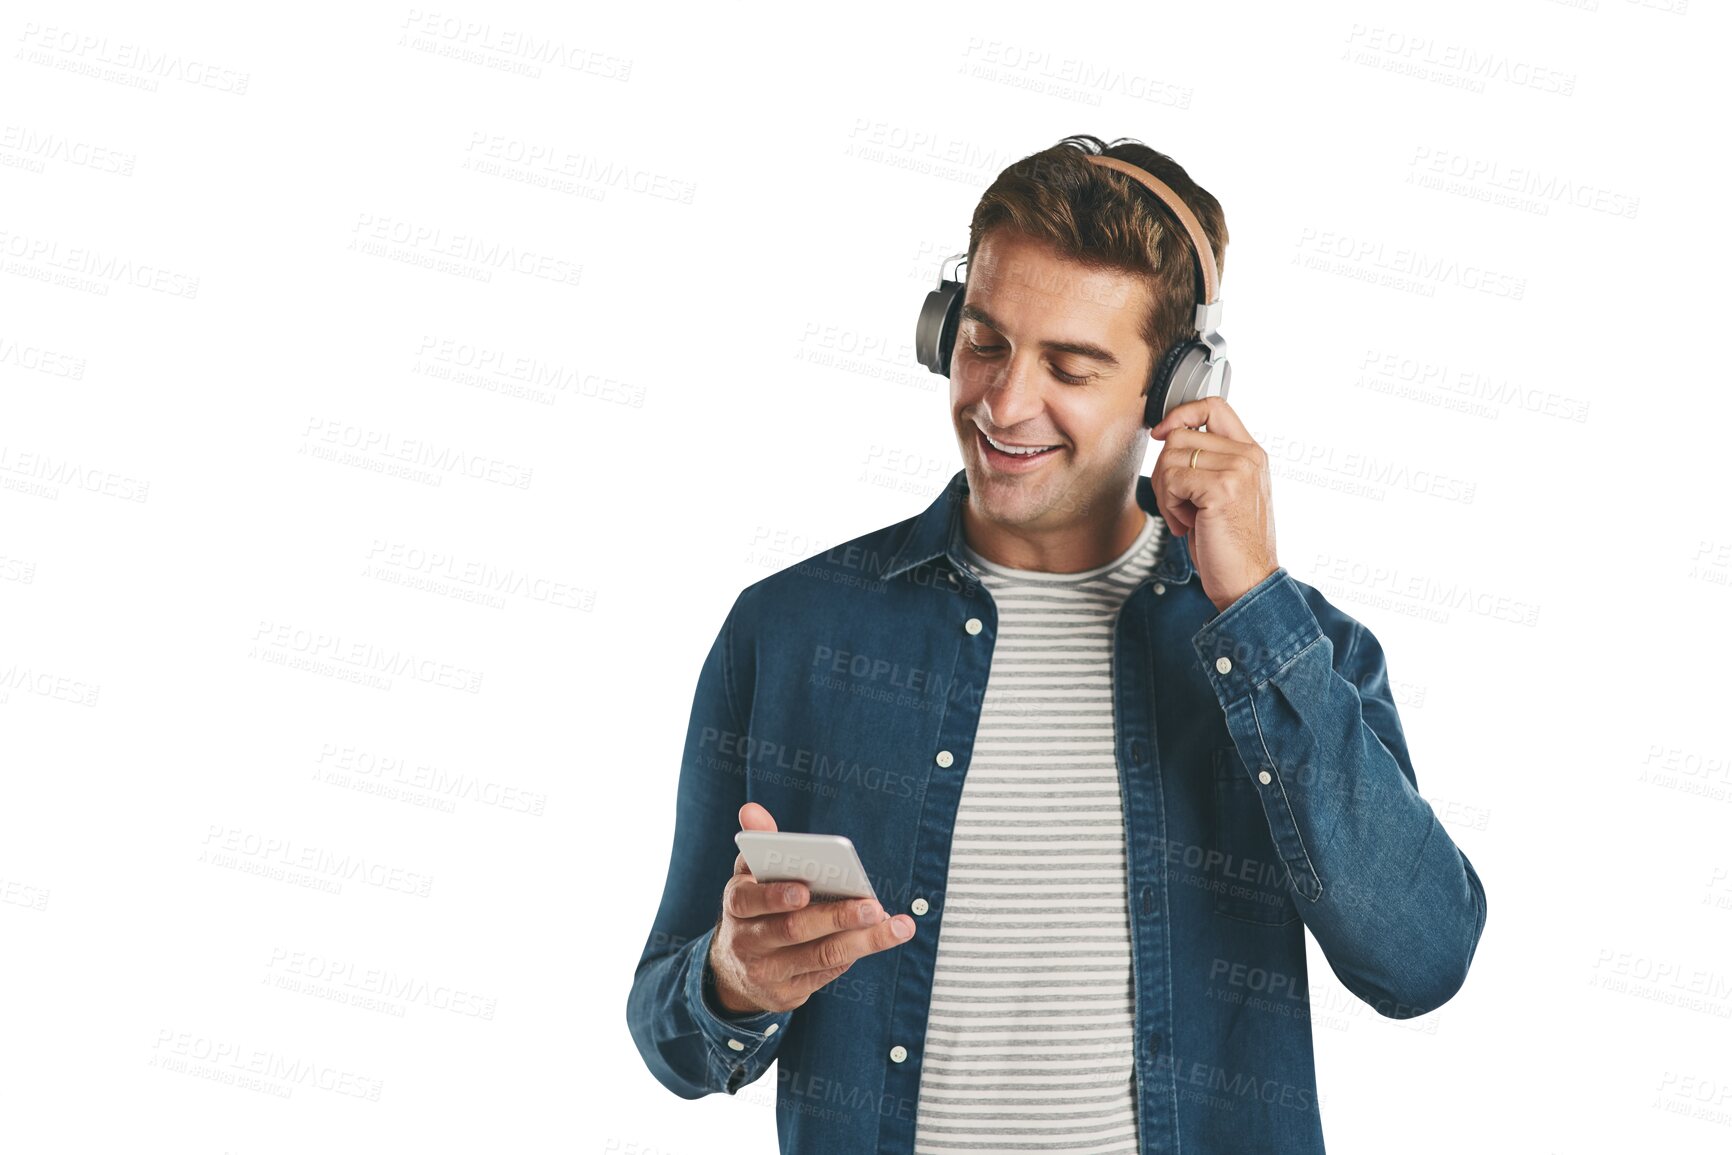 Buy stock photo Headphones, music and happy man with phone for streaming audio on isolated, transparent or png background. Smartphone, search and male person listening to radio, podcast or internet playlist choice